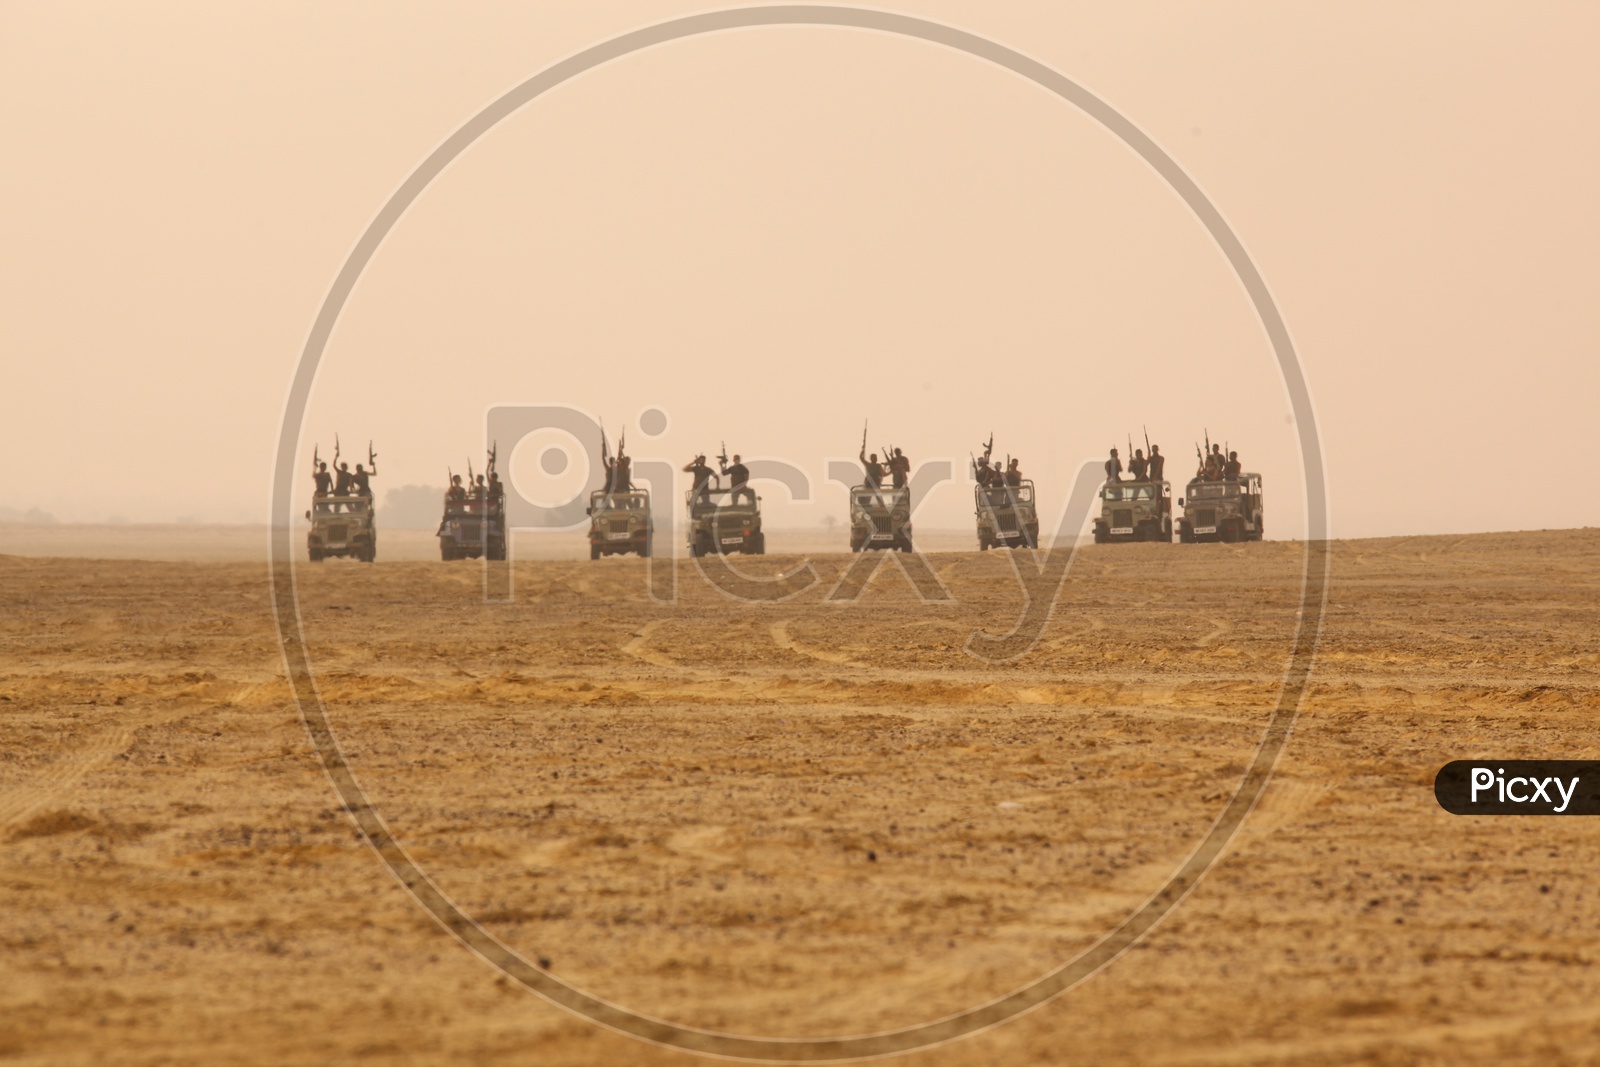 group of people with guns on the vehicles in a desert, bandits